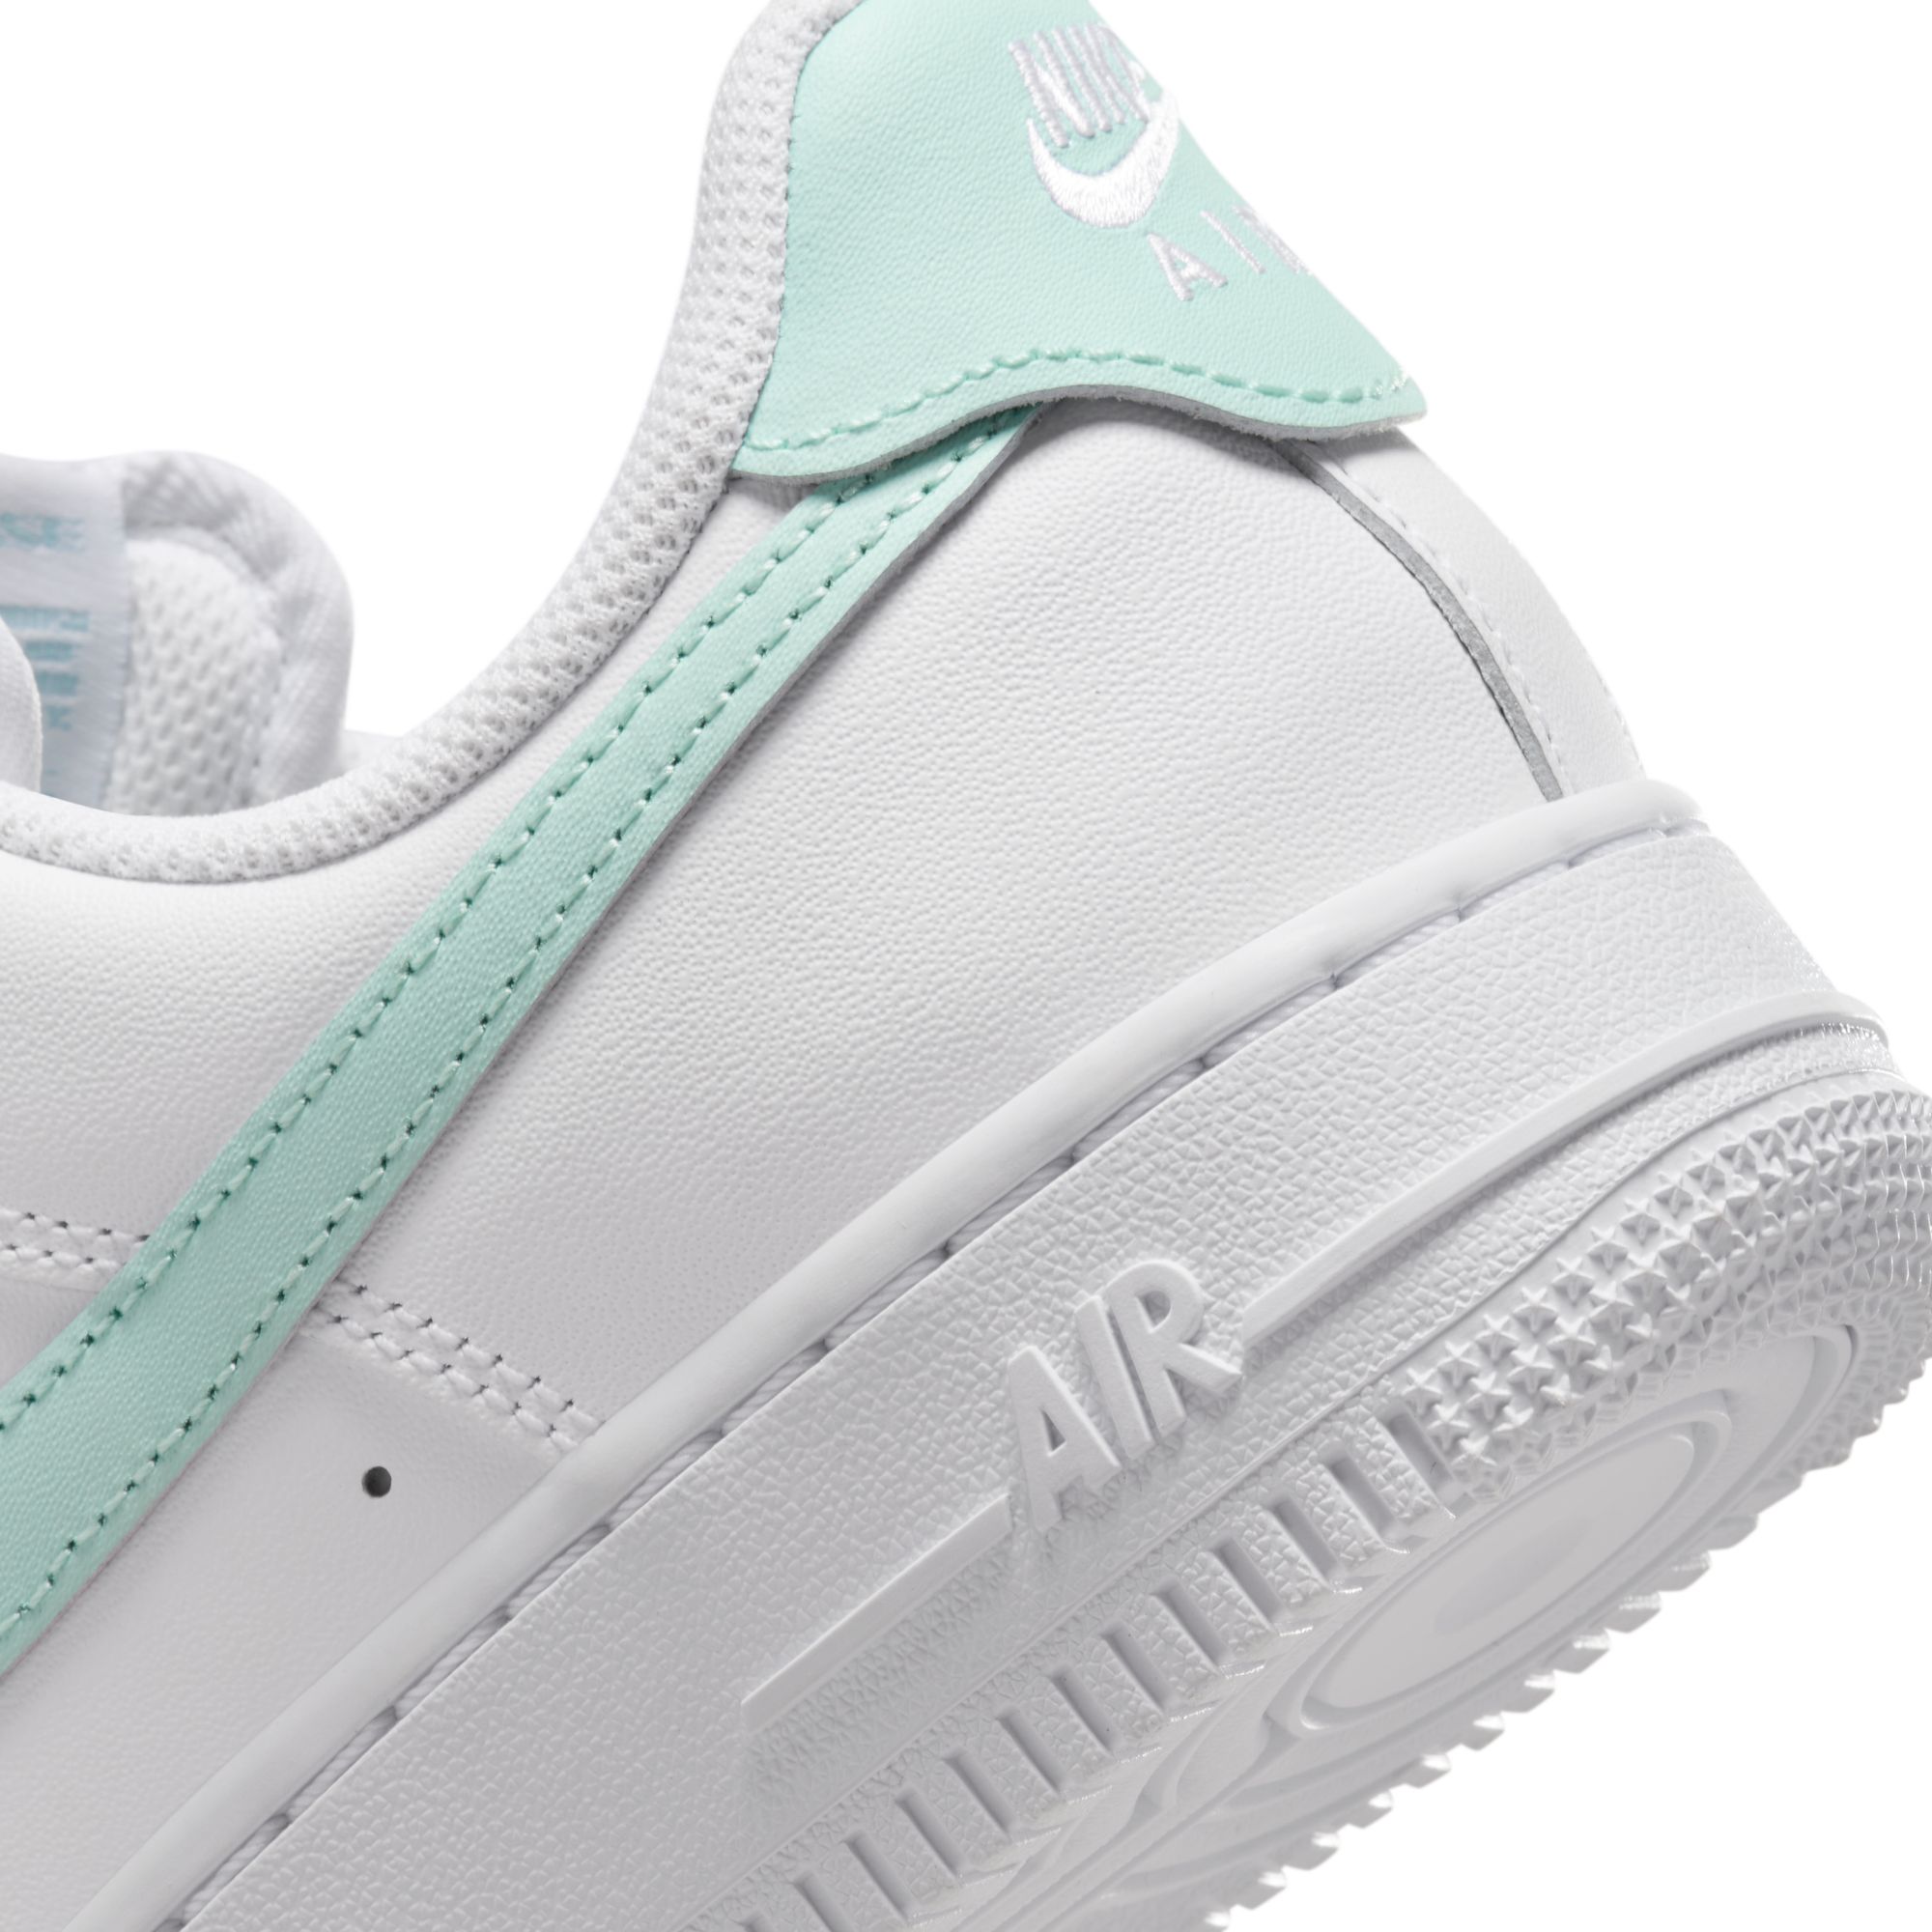 GIÀY THỂ THAO NIKE NỮ AIR FORCE 1 07 EASYON WHITE ICE JADE WOMENS SHOES DX5883-101 7